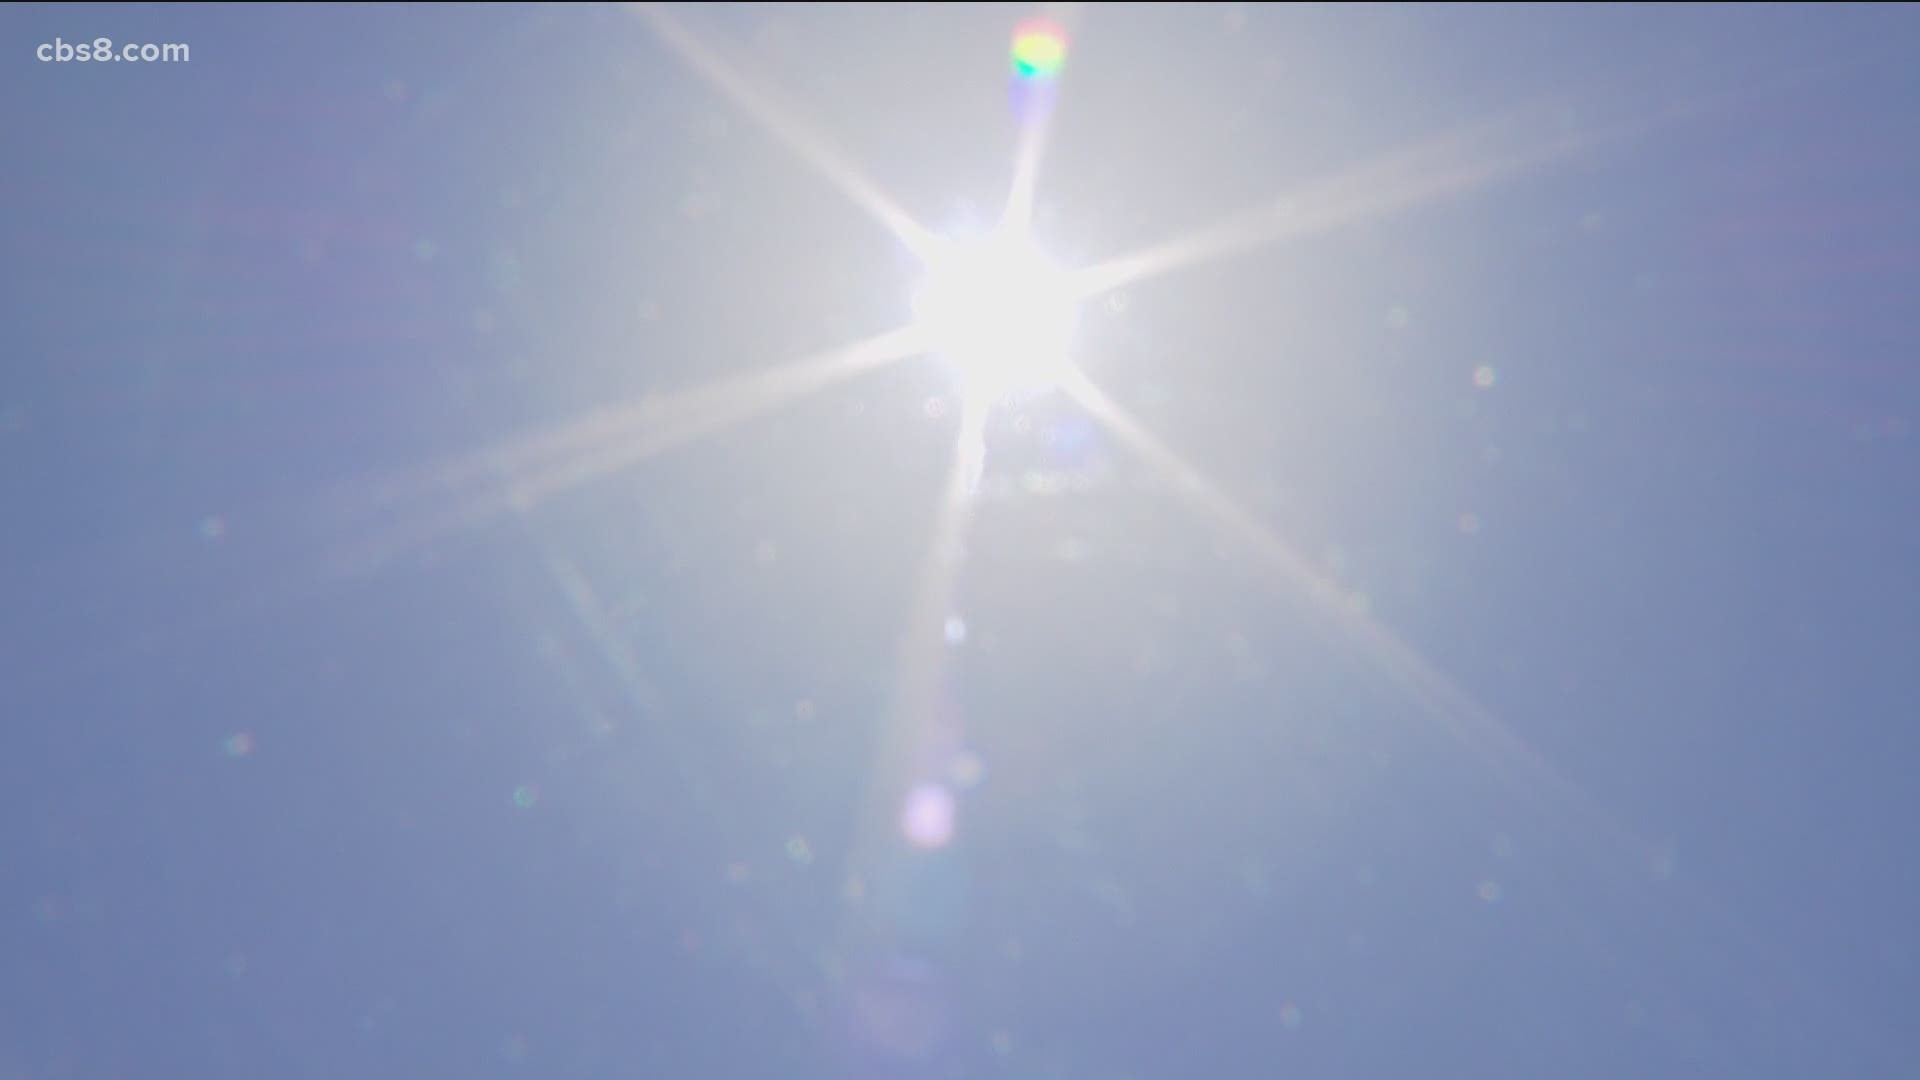 The NWS issued a heat advisory that will be in effect from 11 a.m. Friday to 6 p.m. Saturday in the inland valleys.